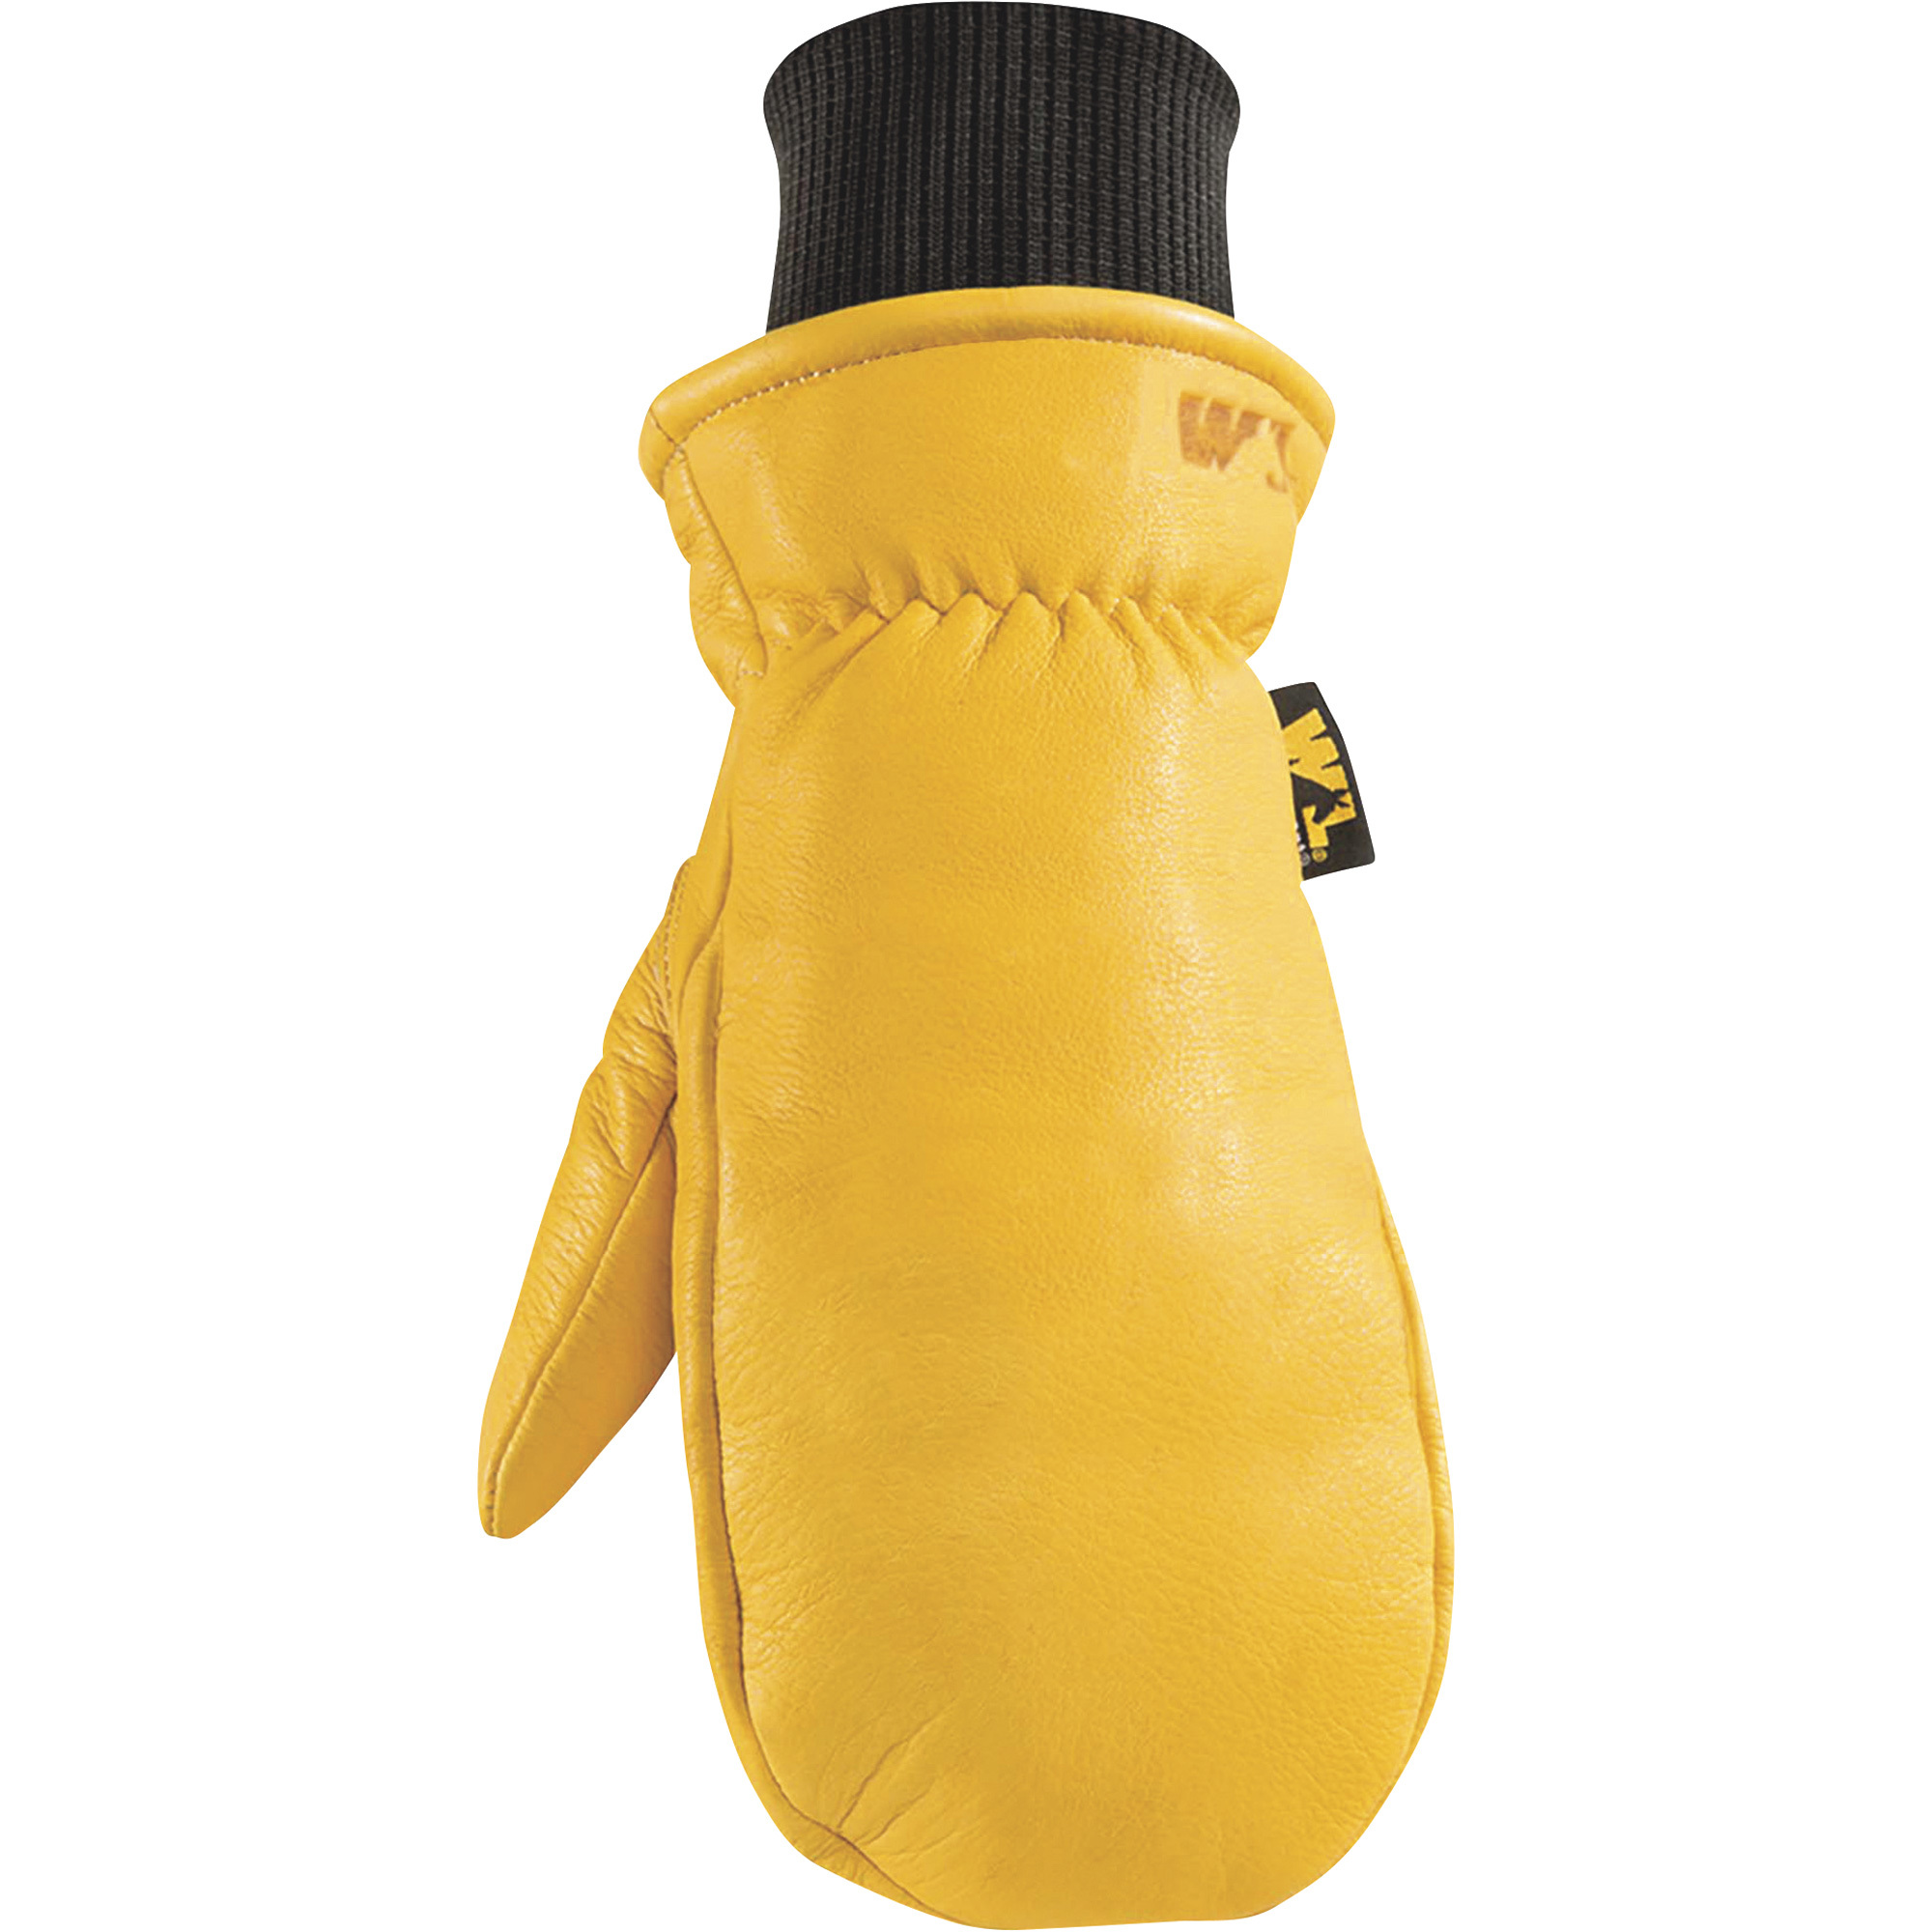 Wells Lamont HydraHyde Leather Mittens â Large, Model 1217L